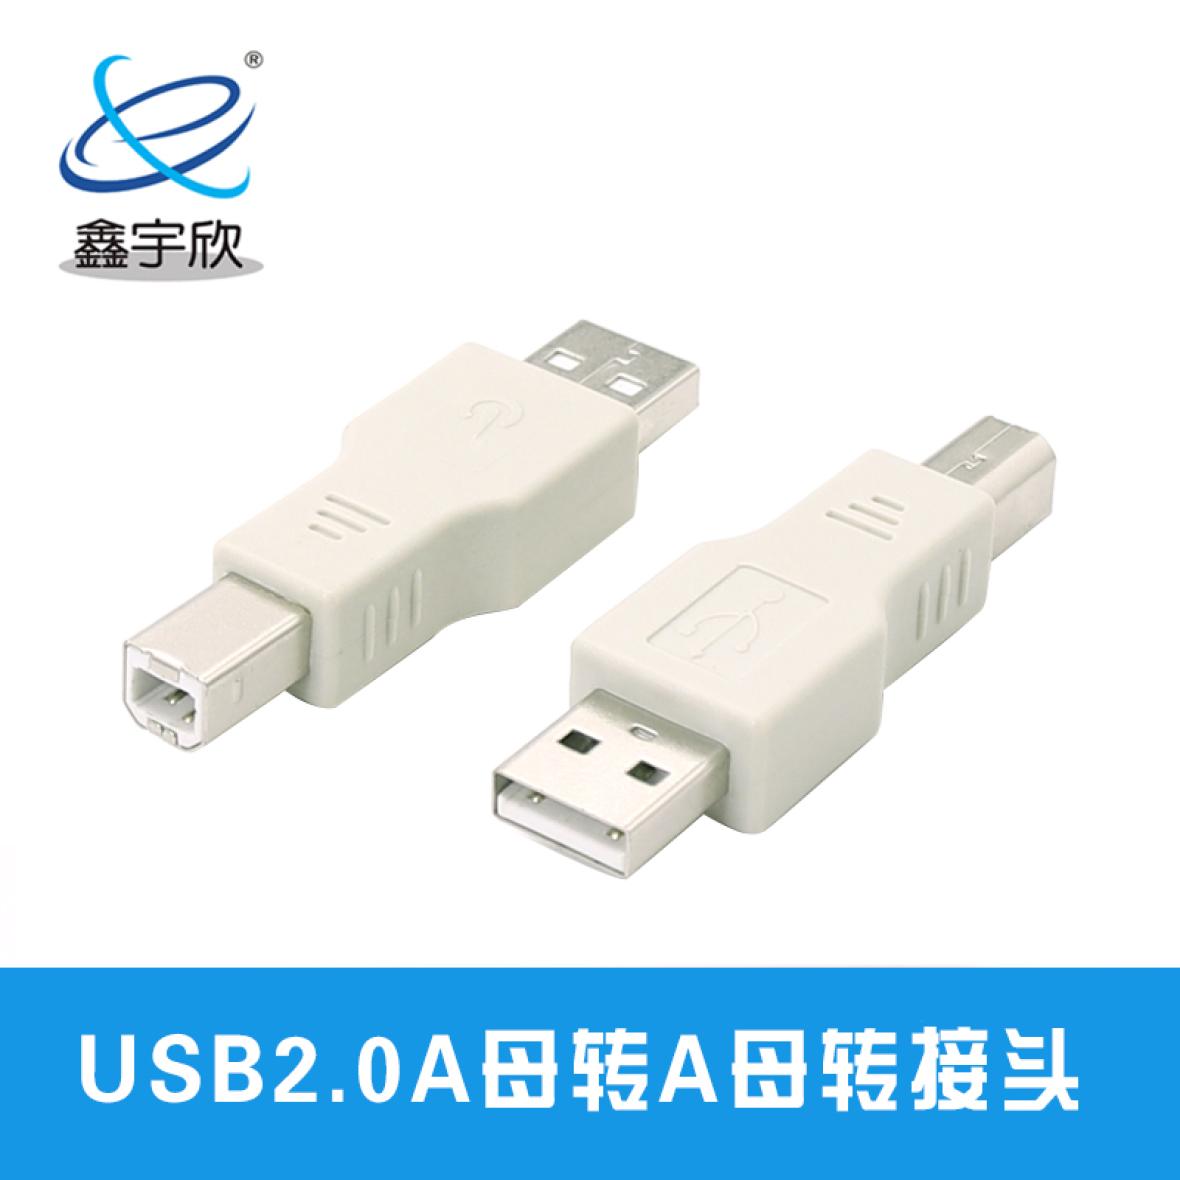  USB2.0A male to B male adapter